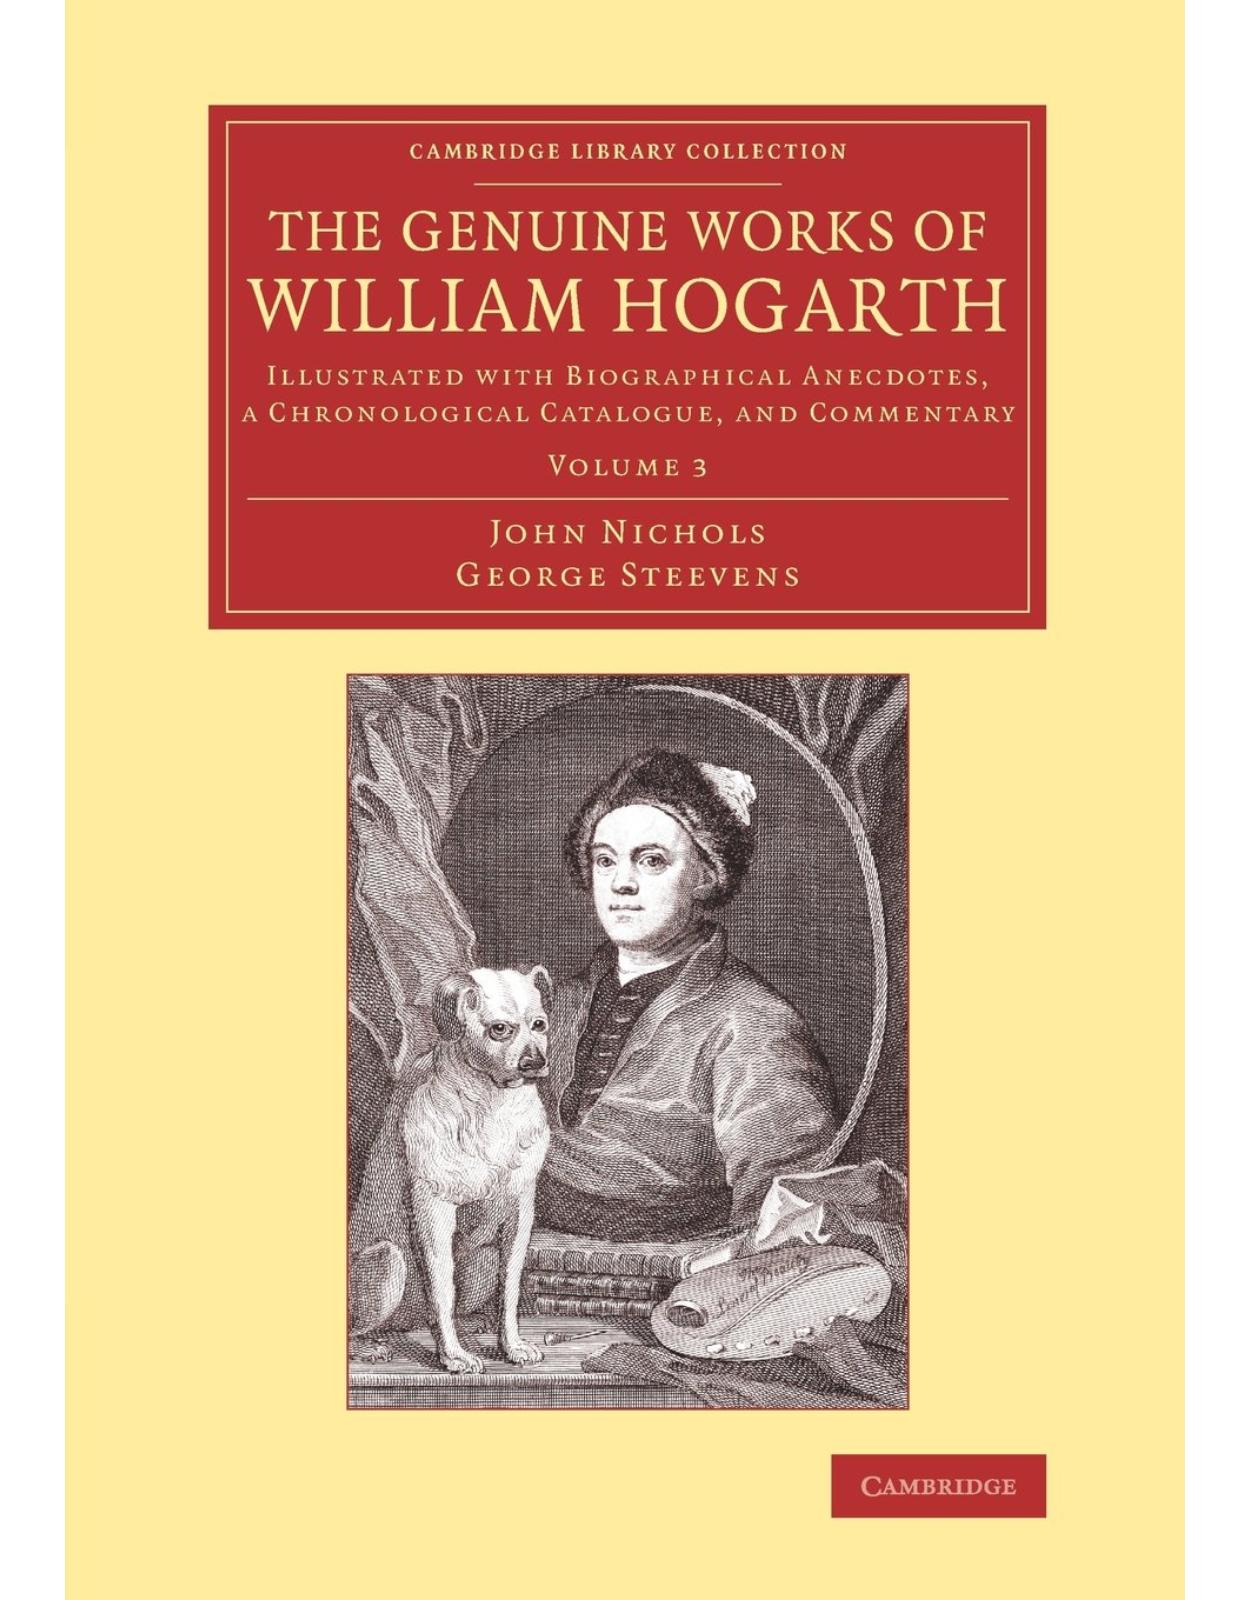 The Genuine Works of William Hogarth: Illustrated with Biographical Anecdotes, a Chronological Catalogue, and Commentary: Volume 3 (Cambridge Library Collection - Art and Architecture)